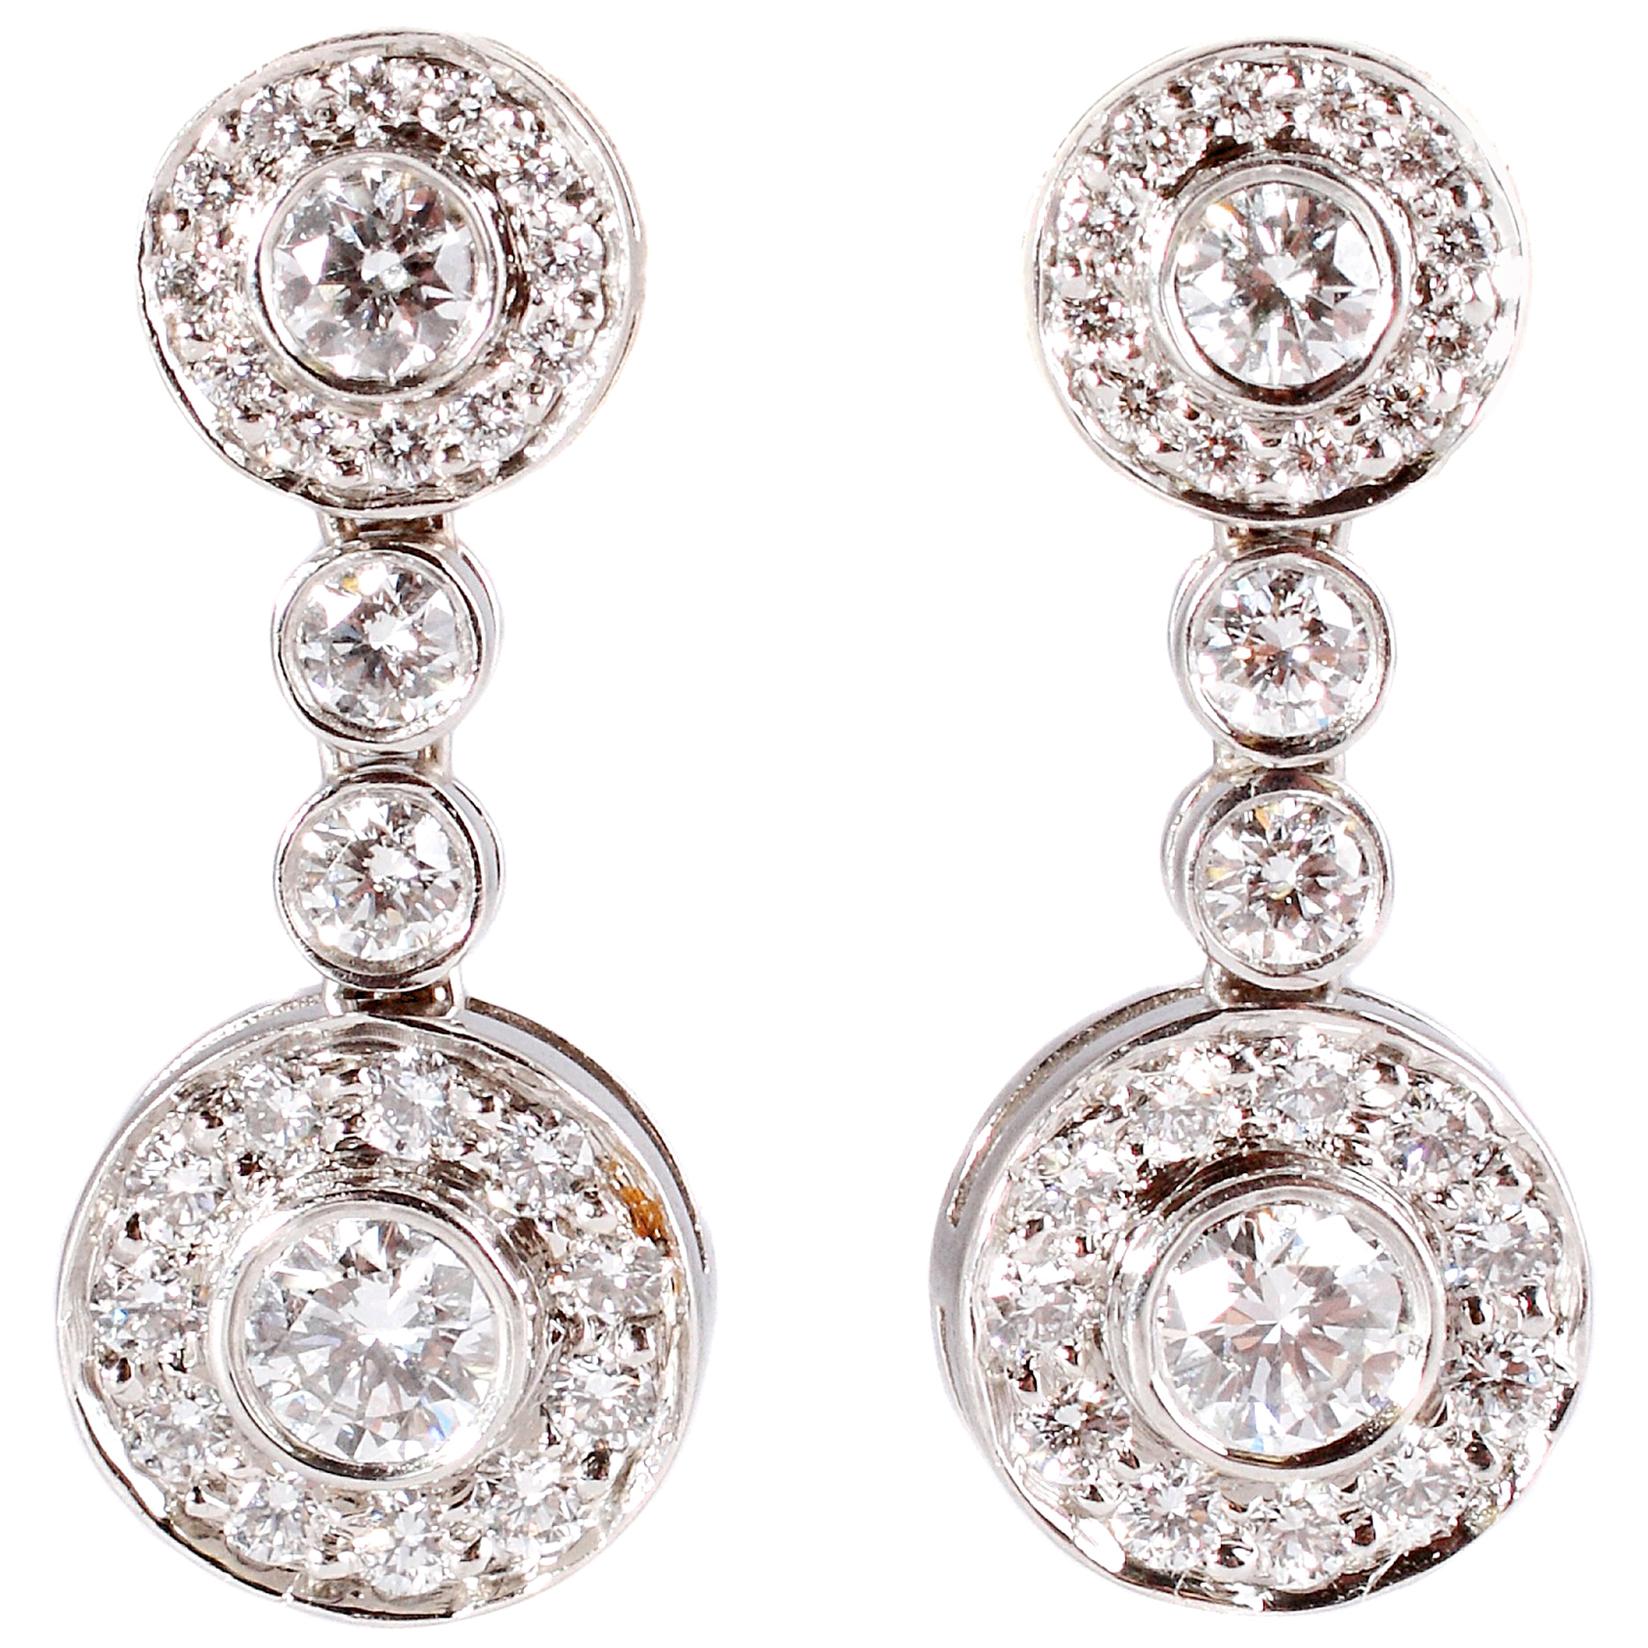 Tiffany & Co. Diamond Earrings "Circlet Collection"